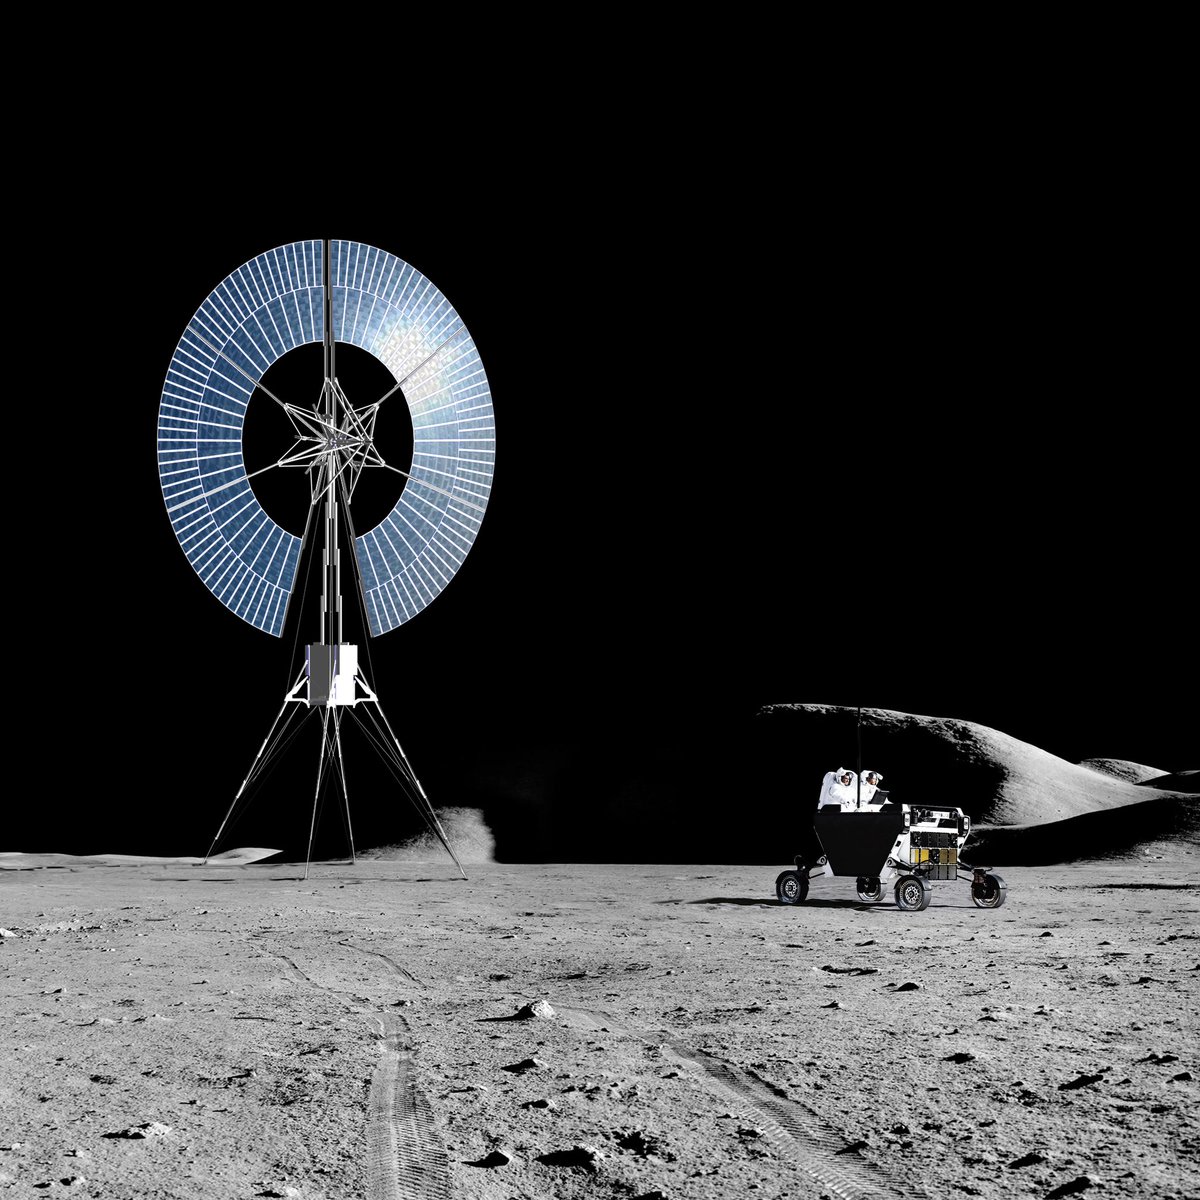 Congratulations to Folditure on their NASA SBIR Phase II award for developing folding 3D structures to enable large-scale solar power arrays on the Moon! Astrolab is proud to collaborate with Folditure and will demonstrate deployment of this technology with our rover, FLEX.